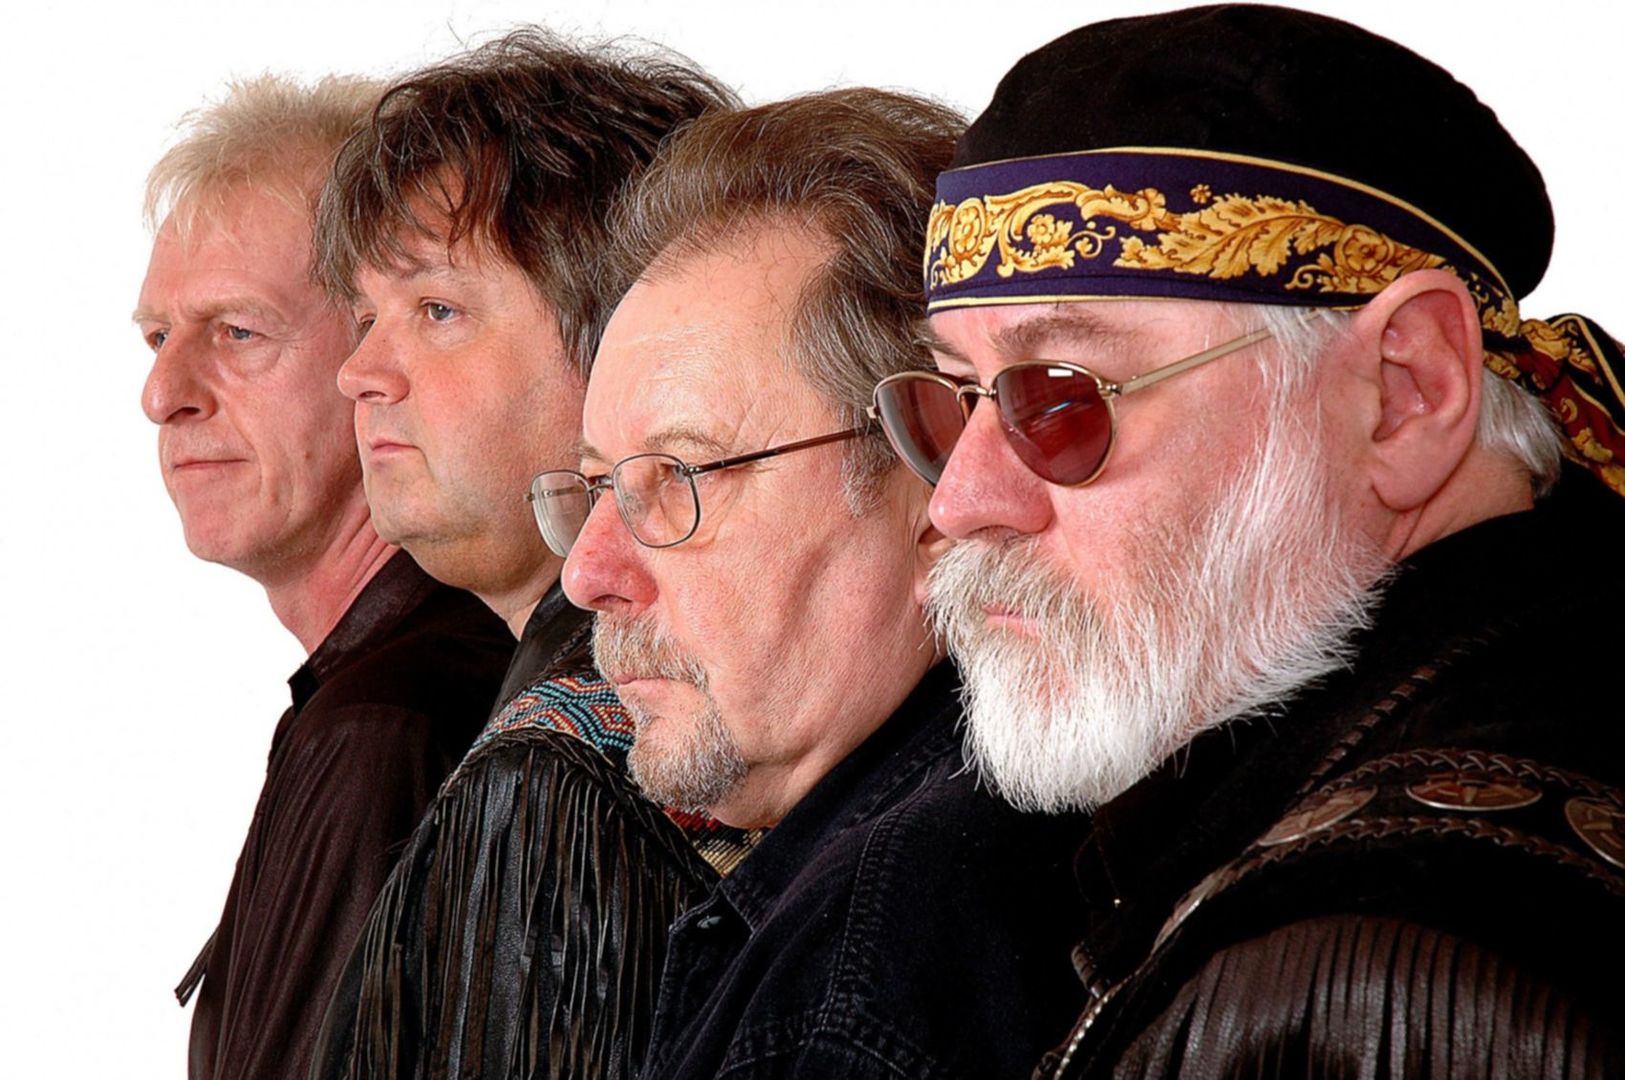 creedence clearwater revived